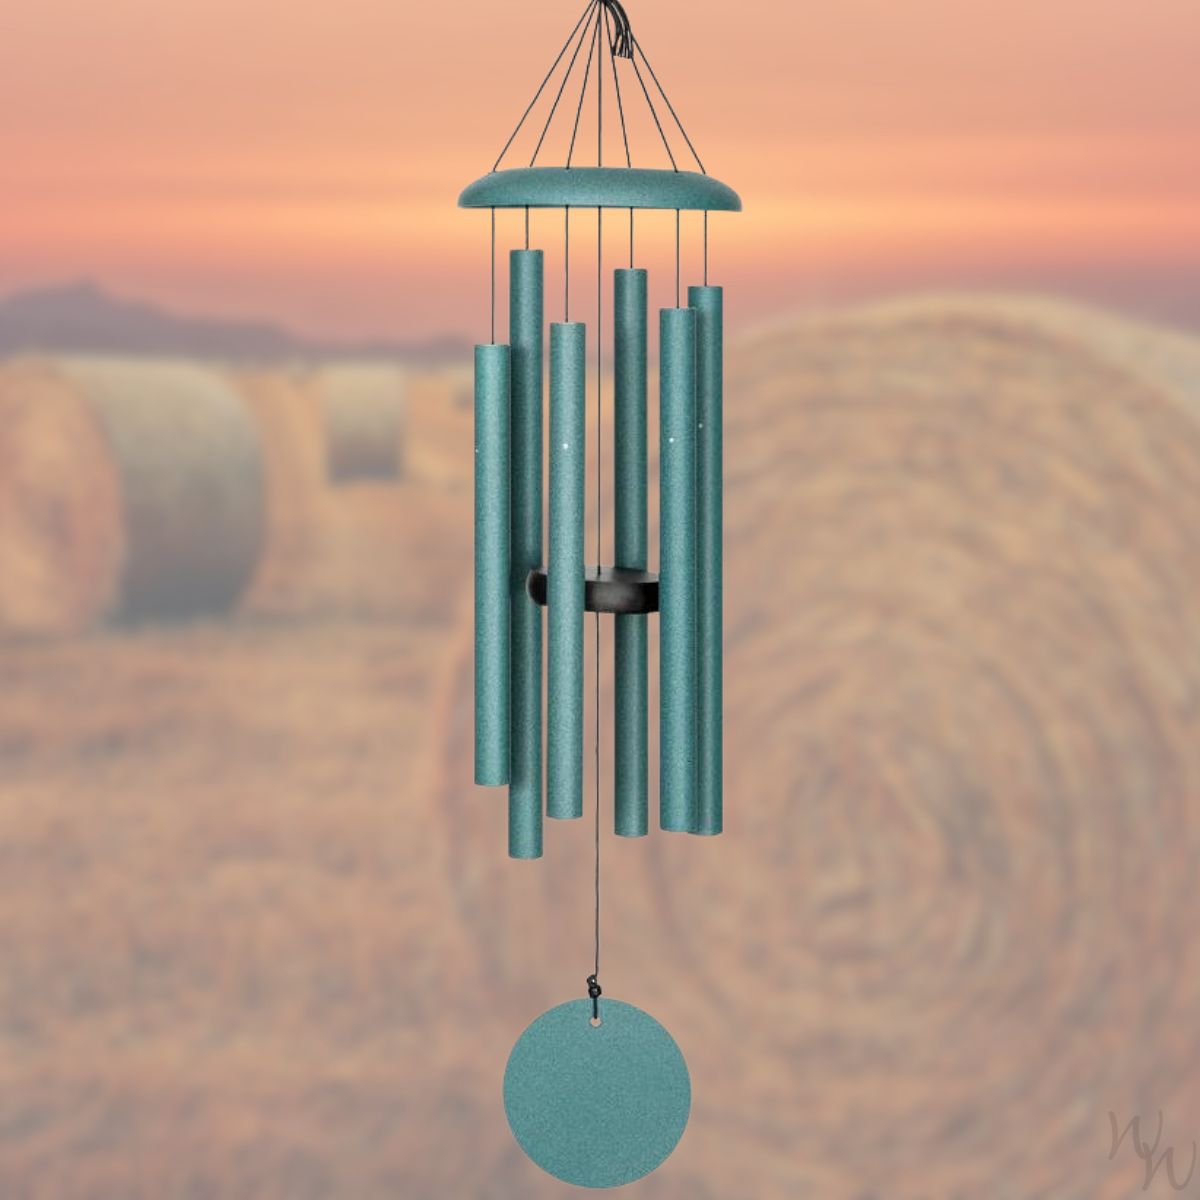 Corinthian Bells 30 Inch Patina Green Wind Chime - Scale Of A